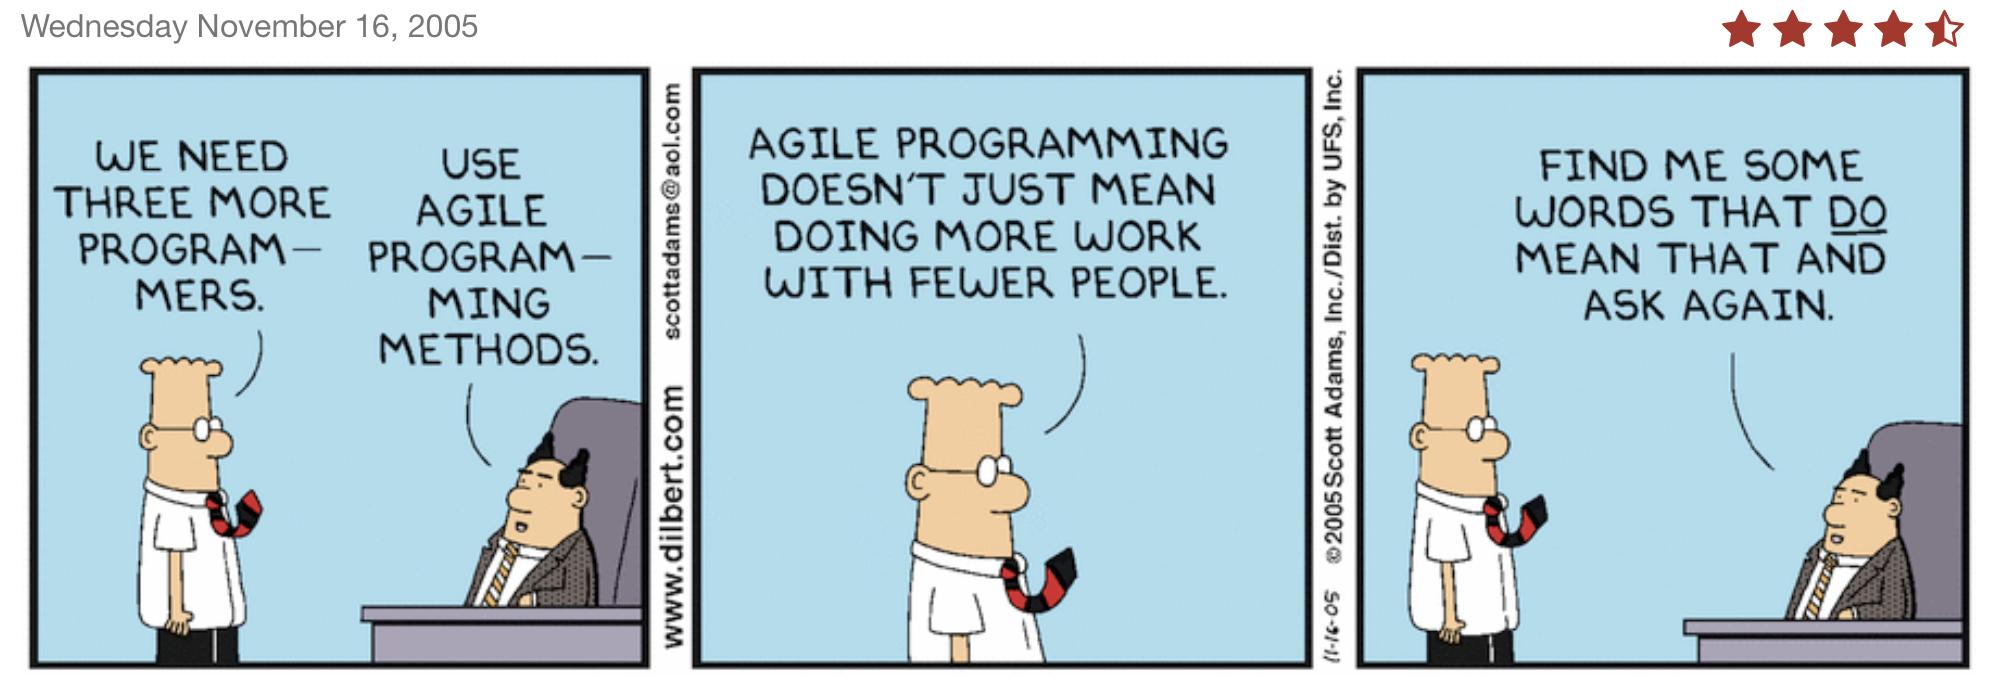 Dilberts Take on Agile vs Bureaucracy - clearly not doing agile right